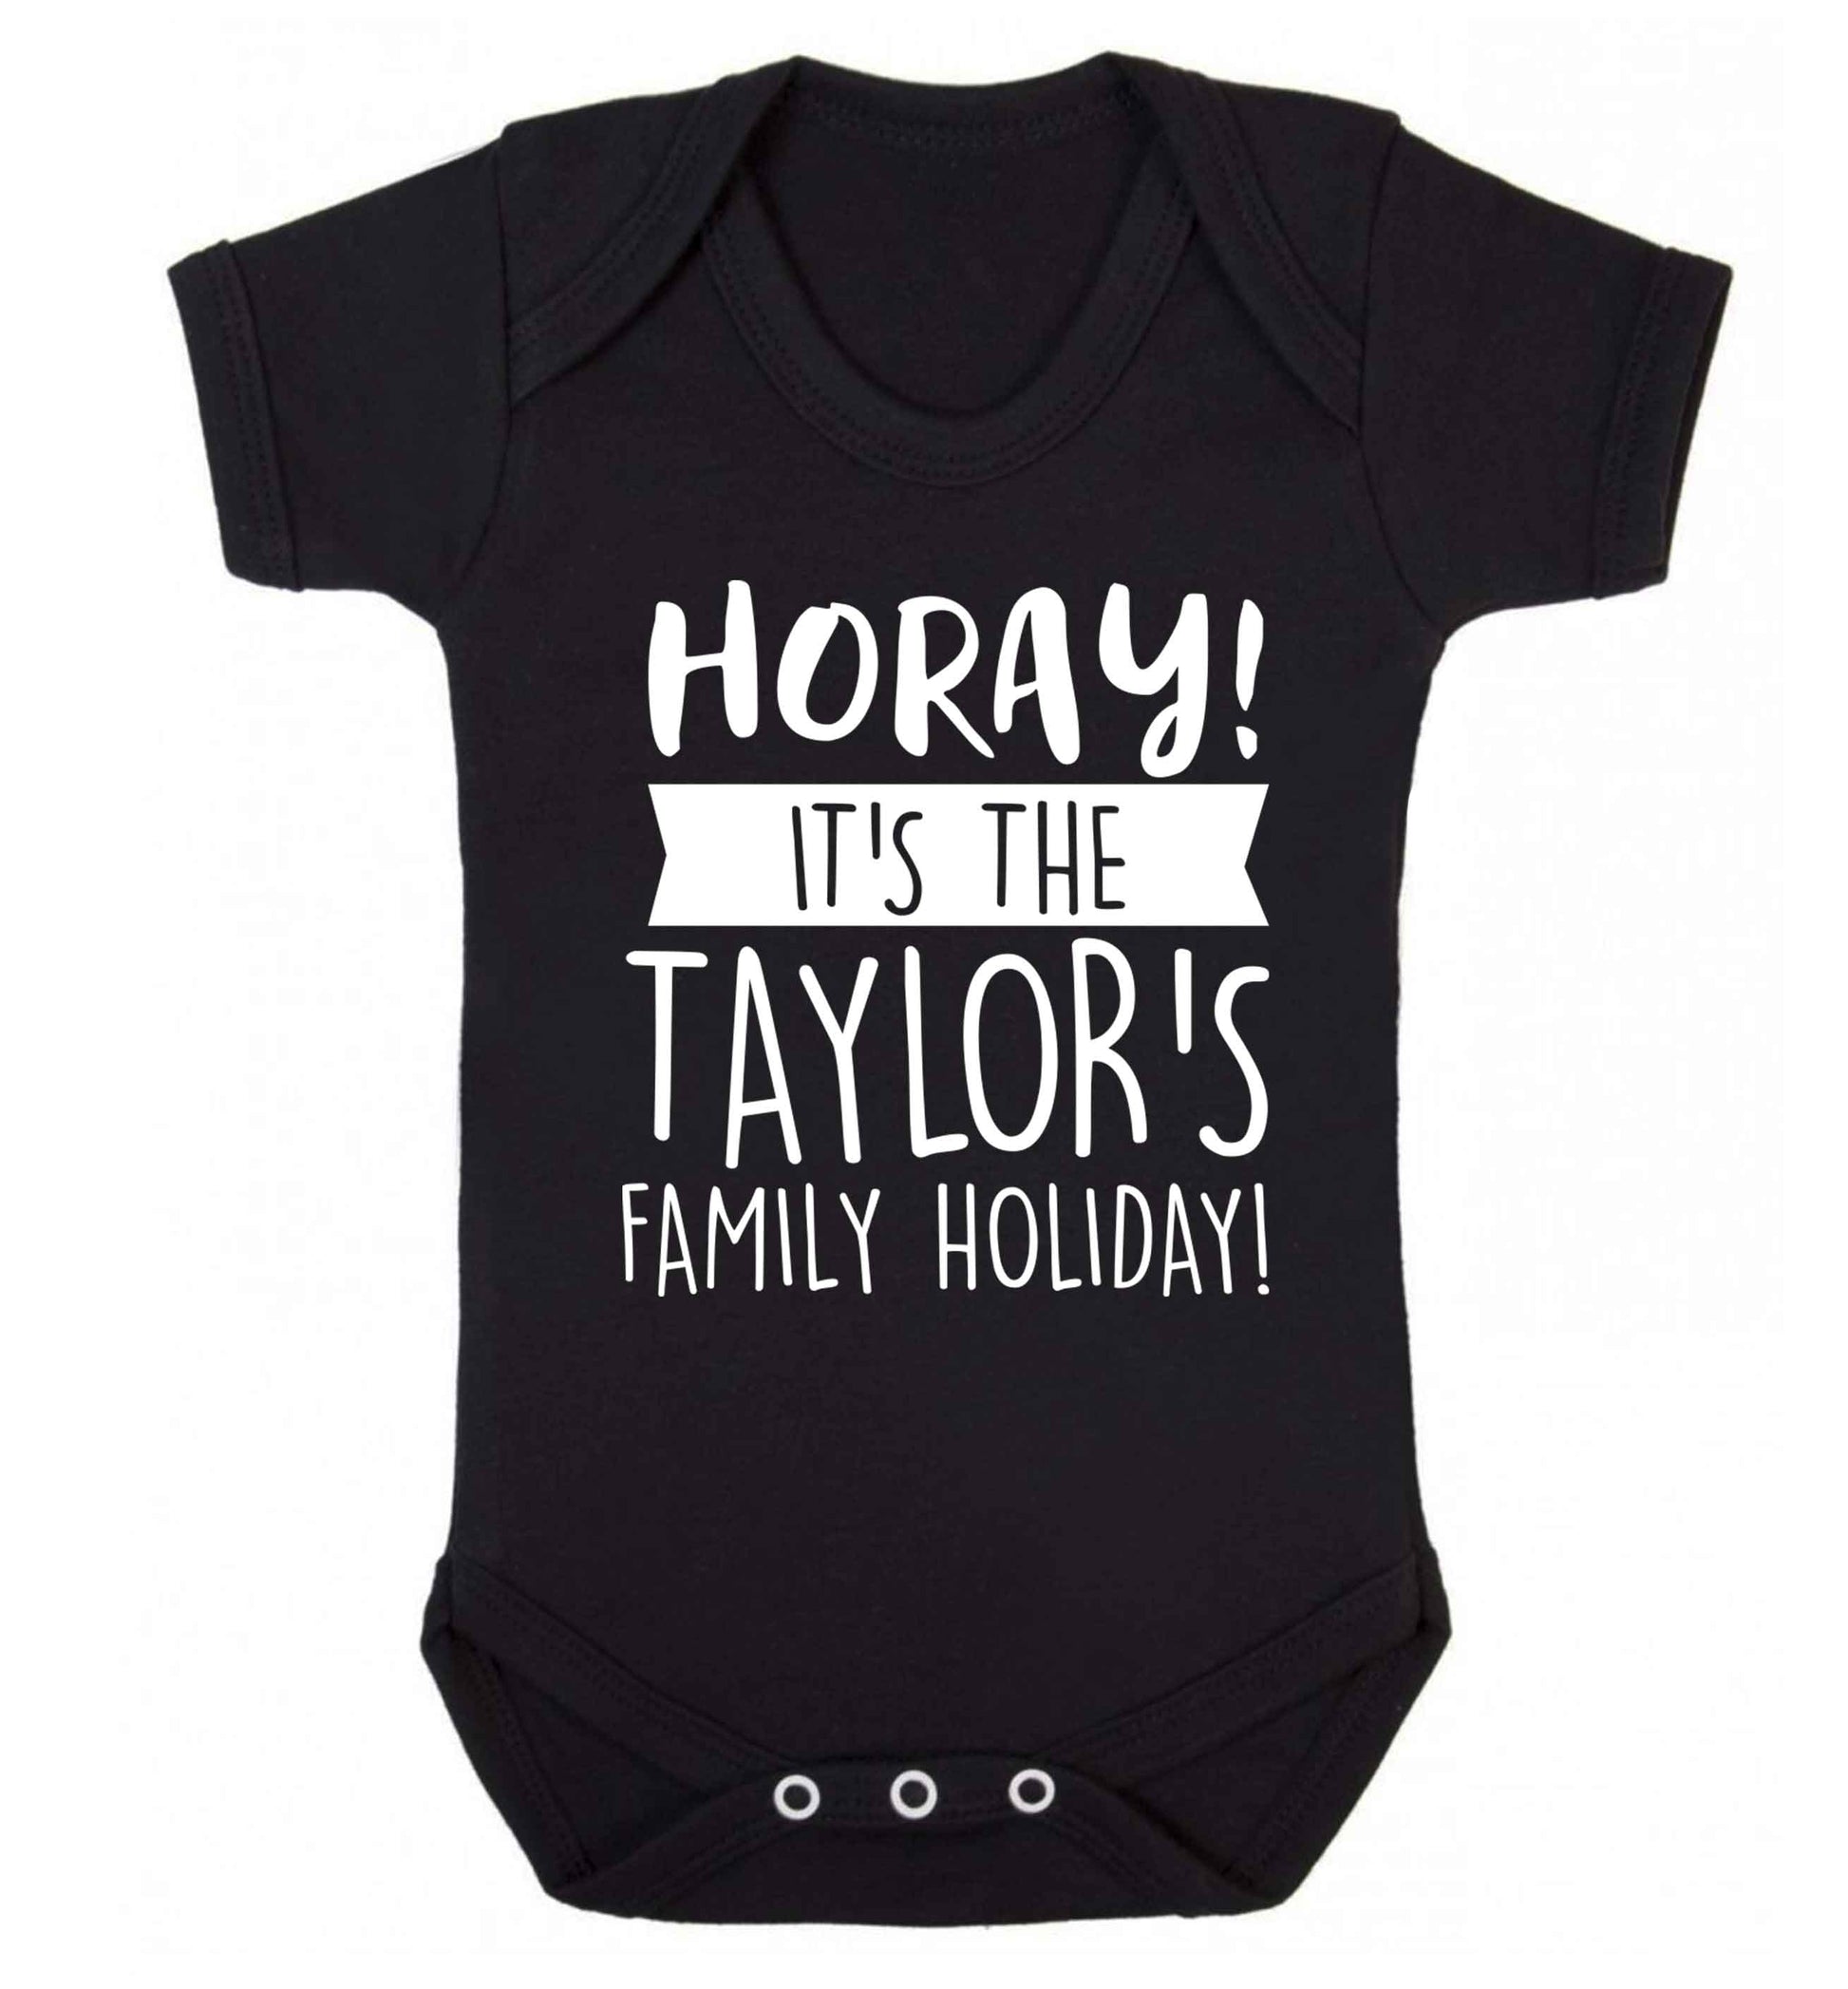 Horay it's the Taylor's family holiday! personalised item Baby Vest black 18-24 months